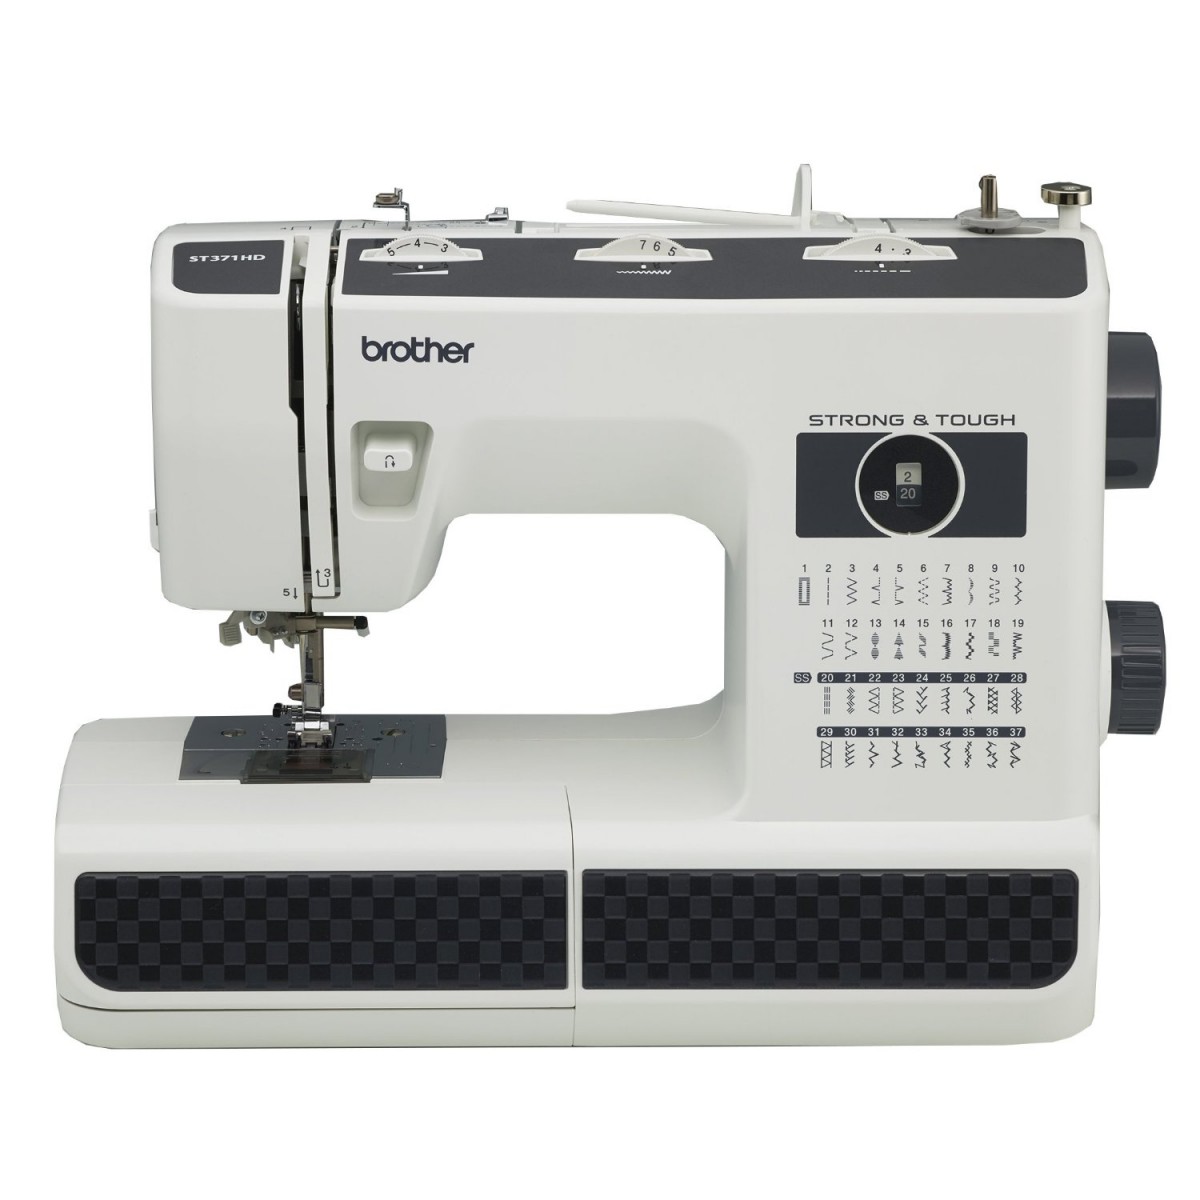 brother st371hd sewing machine review